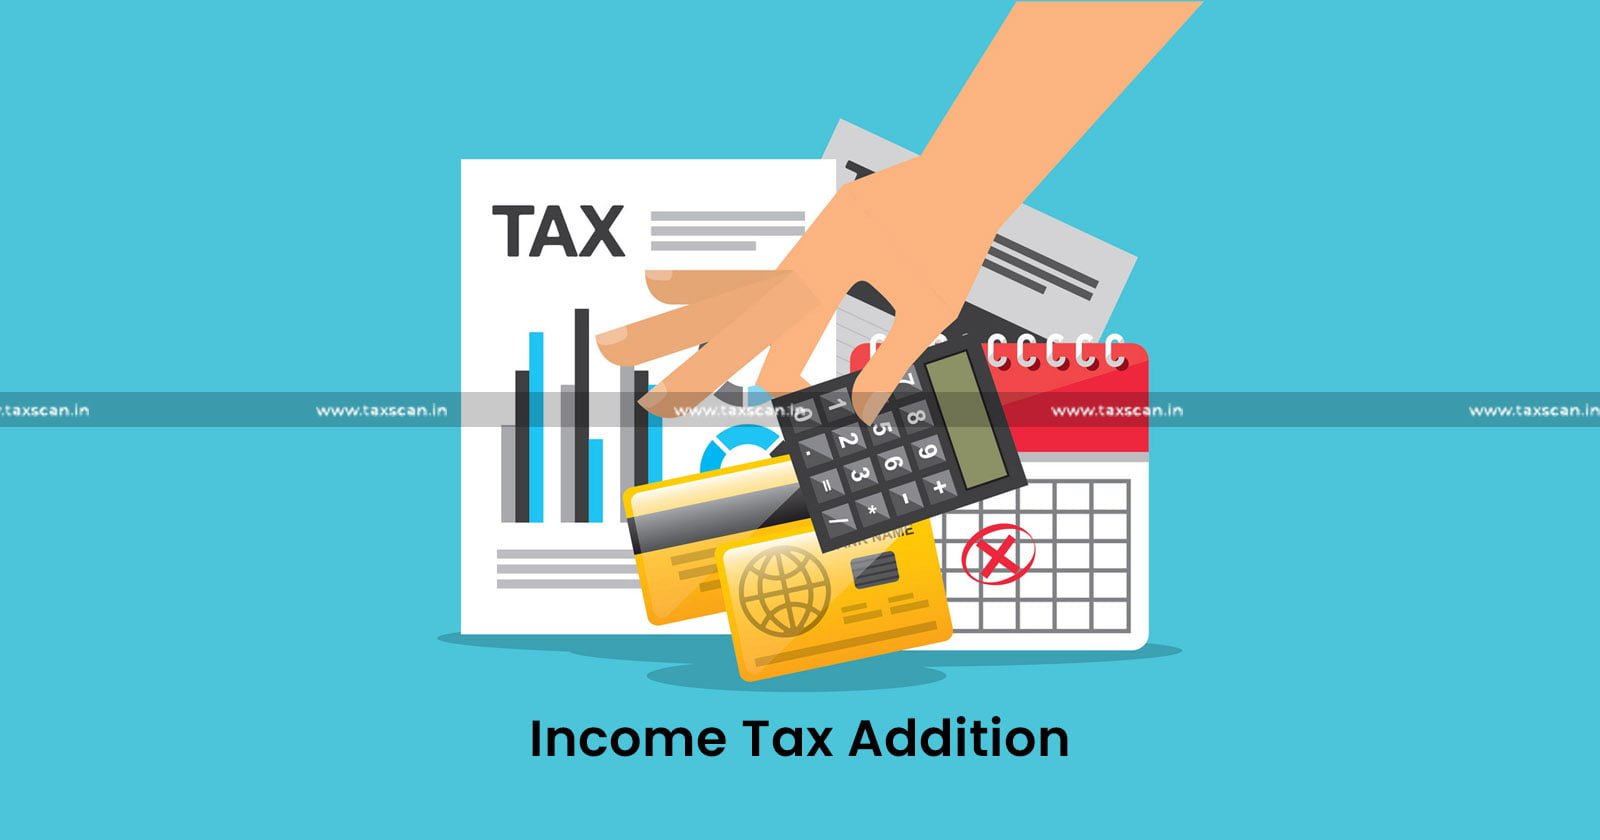 Addition - Addition made by AO - AO - Sufficient Opportunity to Assessee - Sufficient Opportunity - Assessee - ITAT Directs Re-adjudication - ITAT - Re-adjudication - taxscan